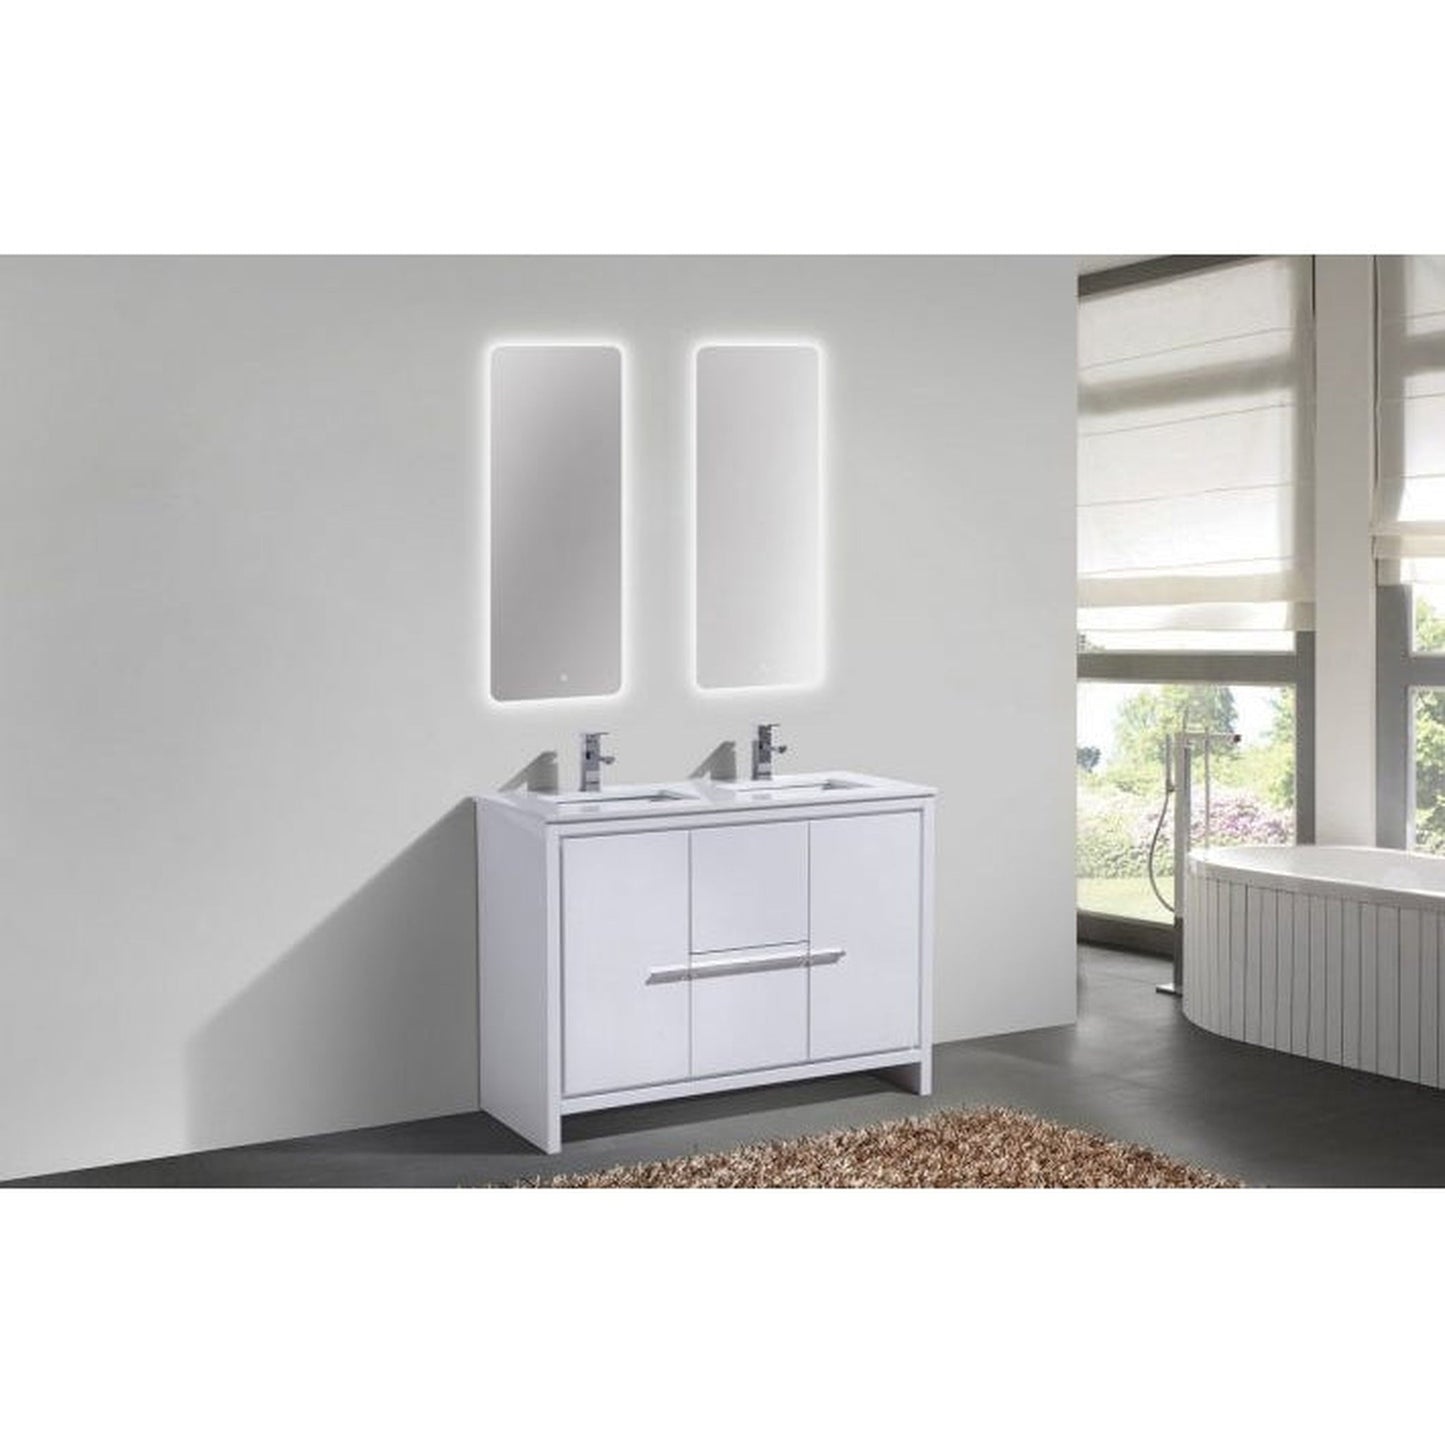 KubeBath Dolce 48" High Gloss White Freestanding Modern Bathroom Vanity With Quartz Vanity Top & Ceramic Double Sink With Overflow and 48" White Framed Mirror With Shelf